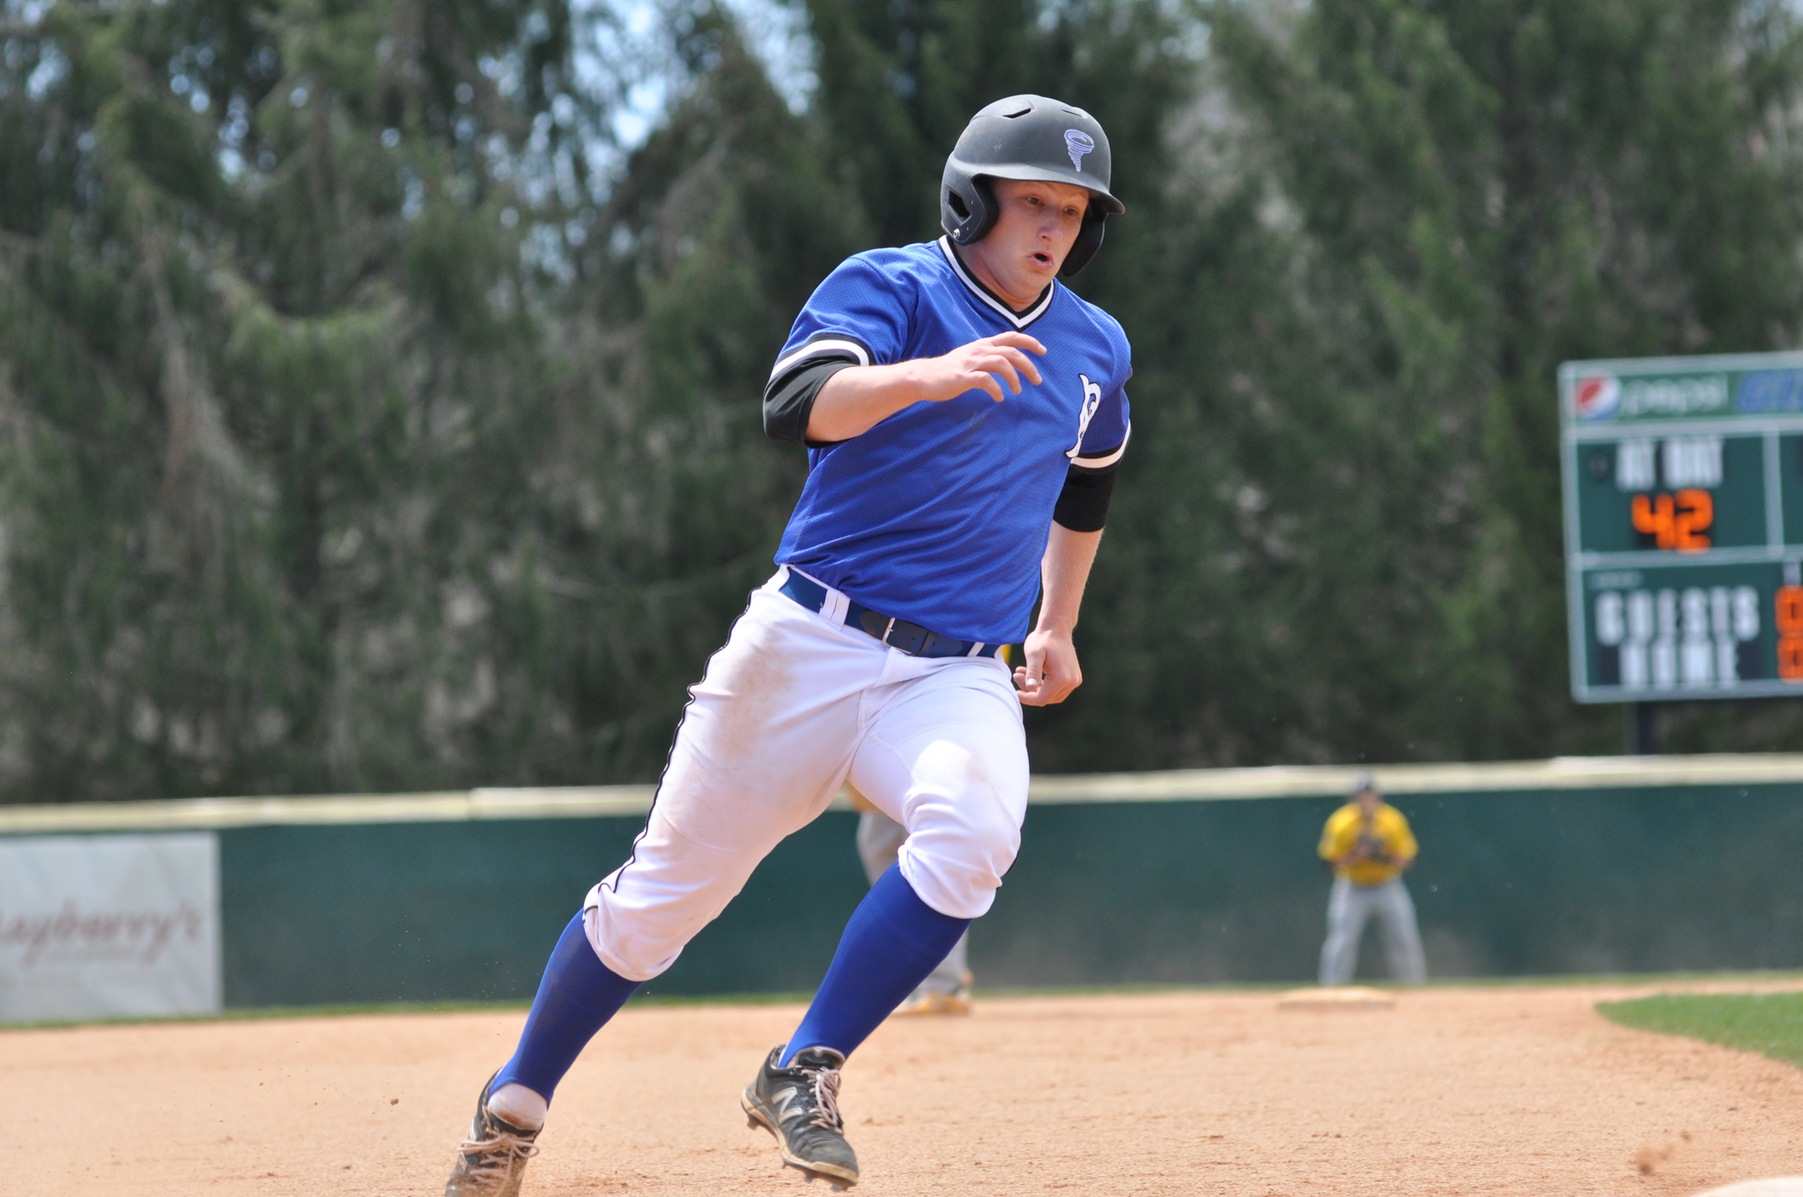 Brevard Splits Doubleheader with William Peace to End Season